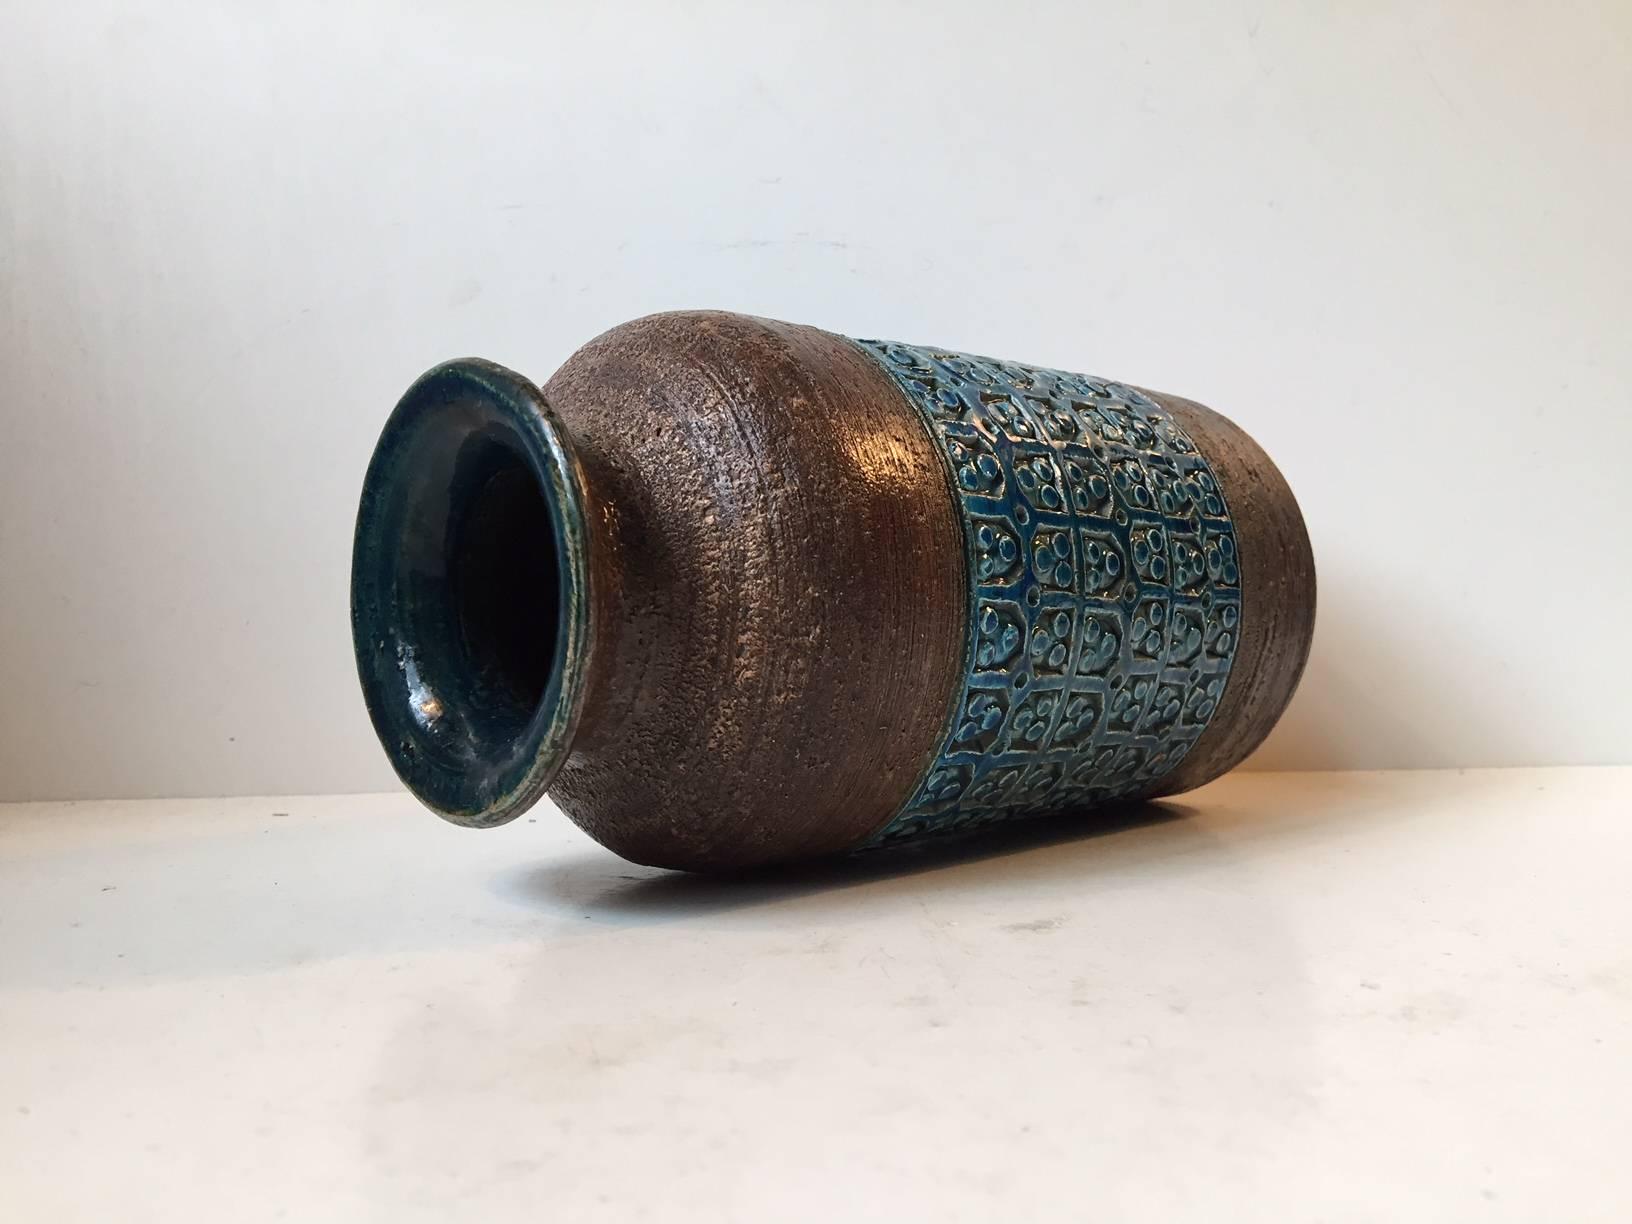 Aldo Londi designed this lacquered stoneware vase with Rimini Blue Trifoglio patterns. It was manufactured in Italy by Bitossi during the 1960s.